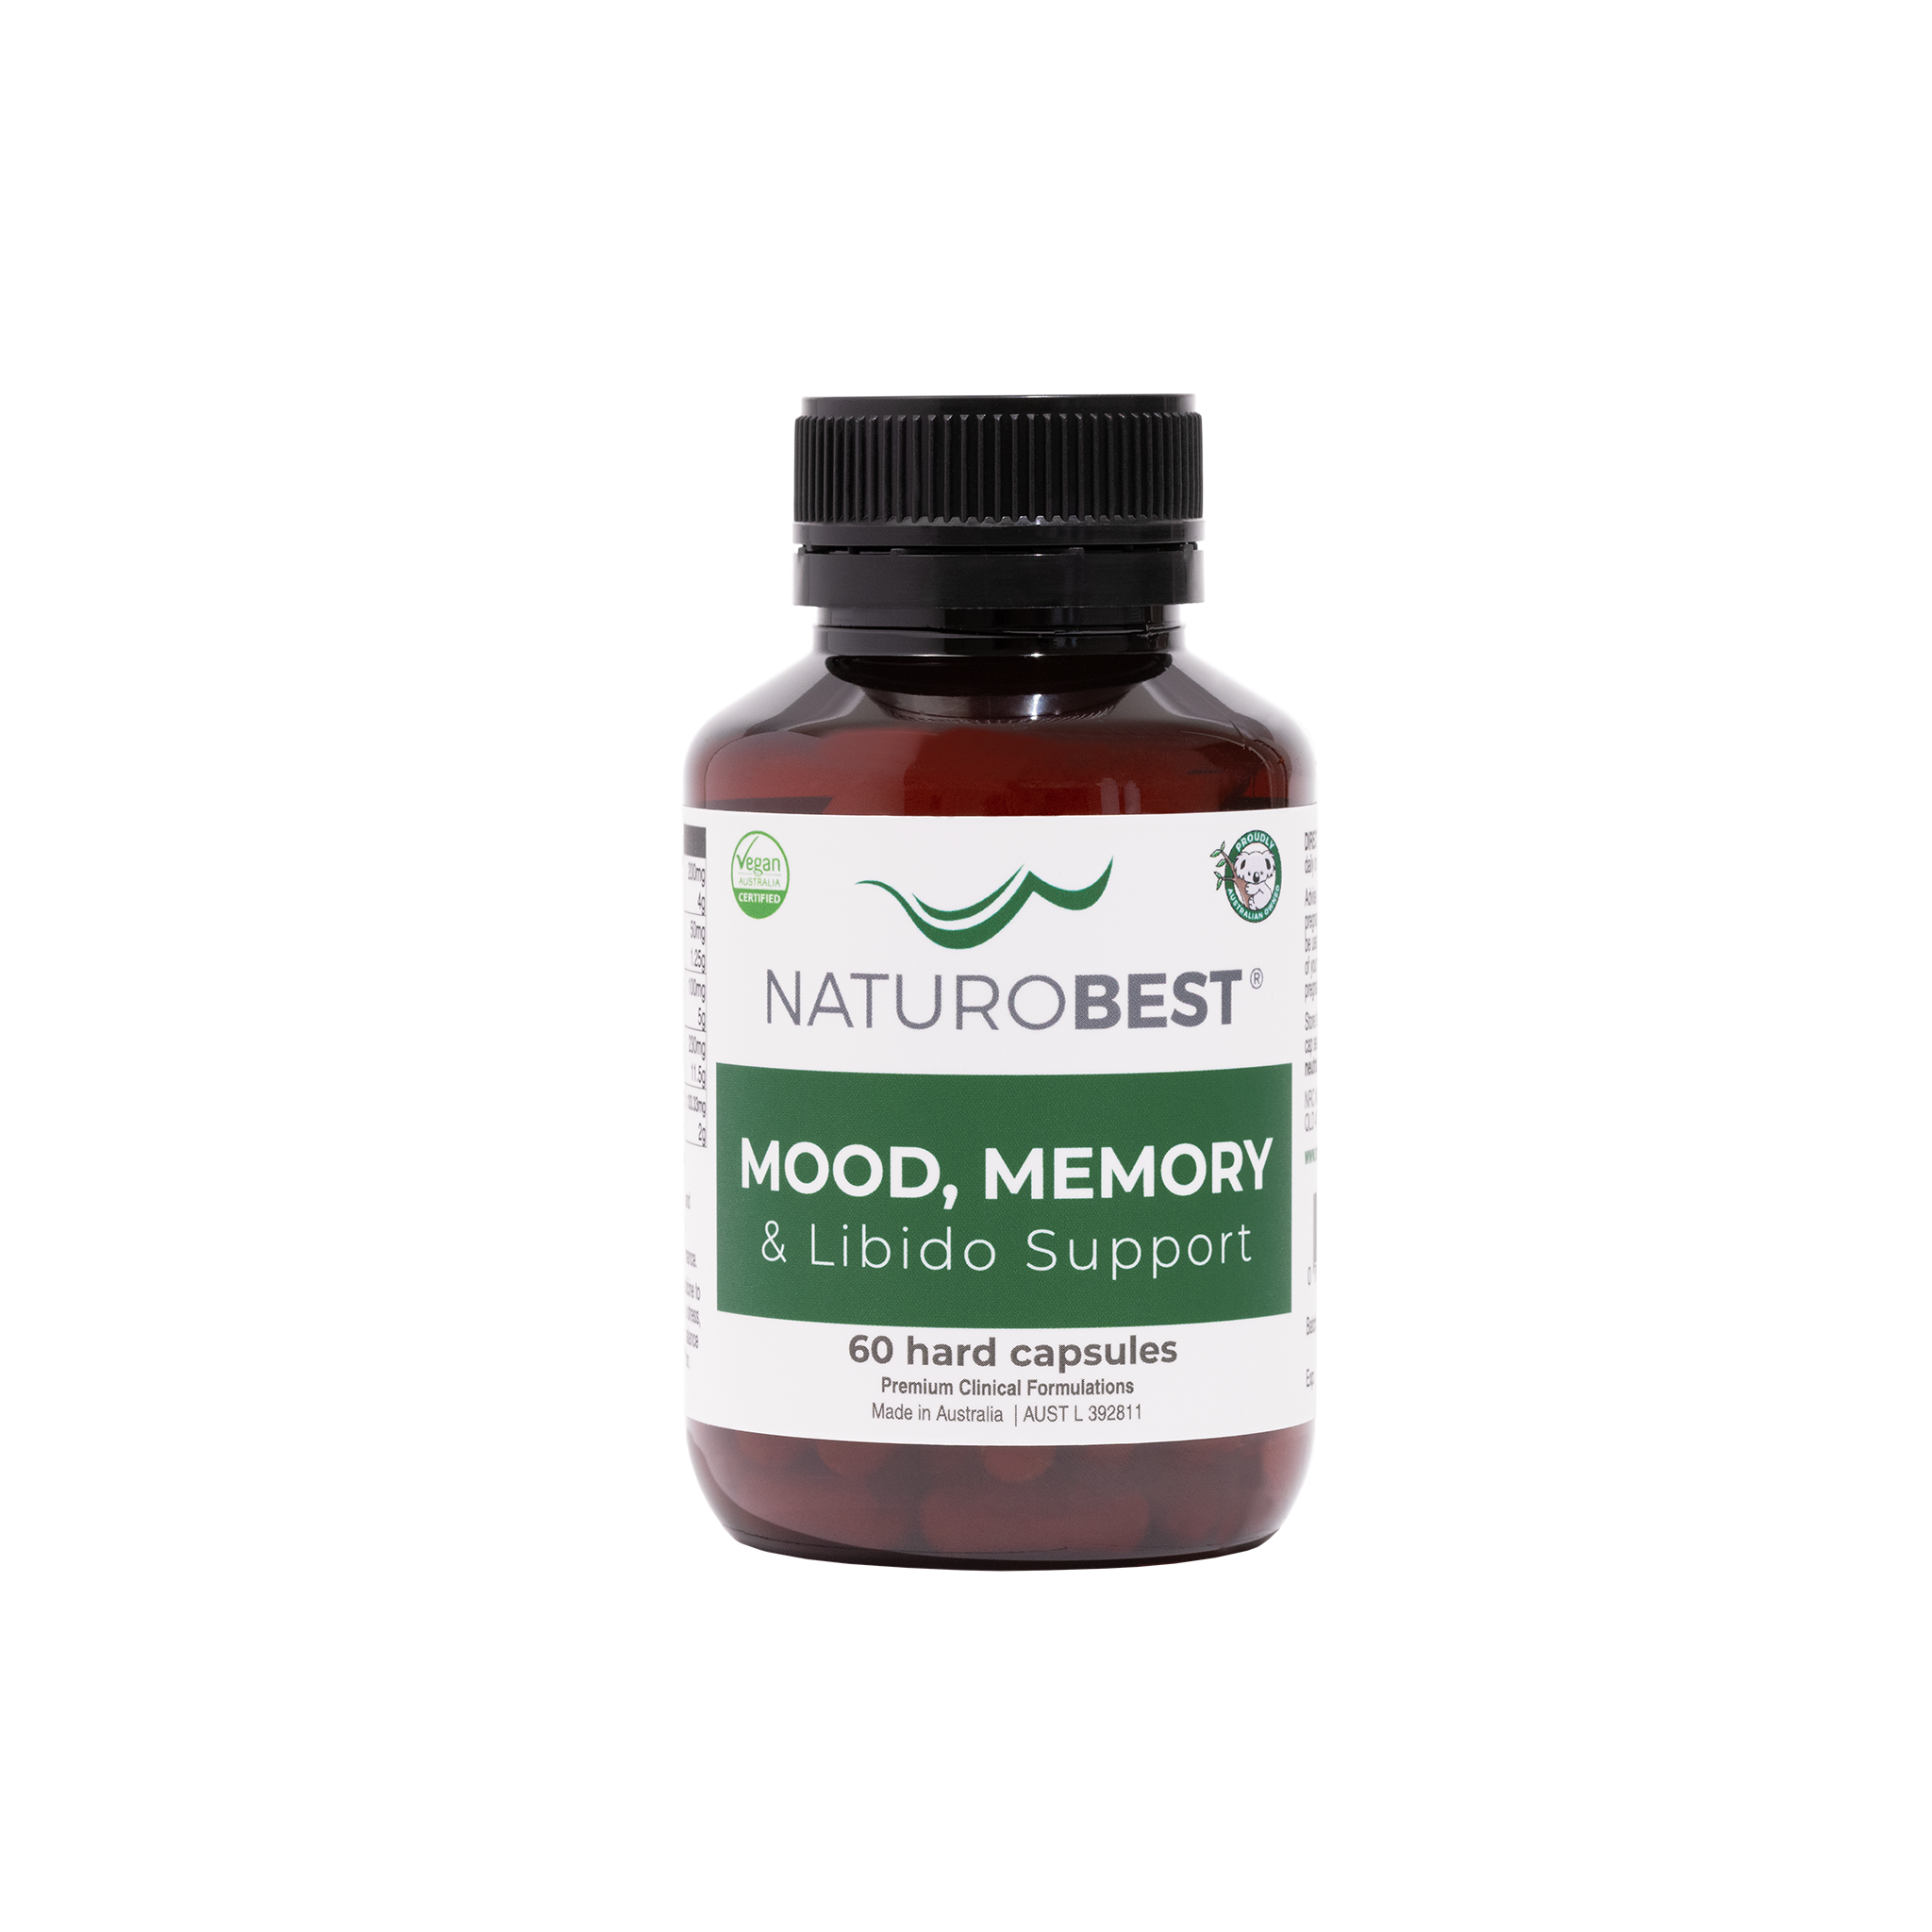 Mood, Memory & Libido Support | 6-Pack | Buy 5, Get 1 Free!